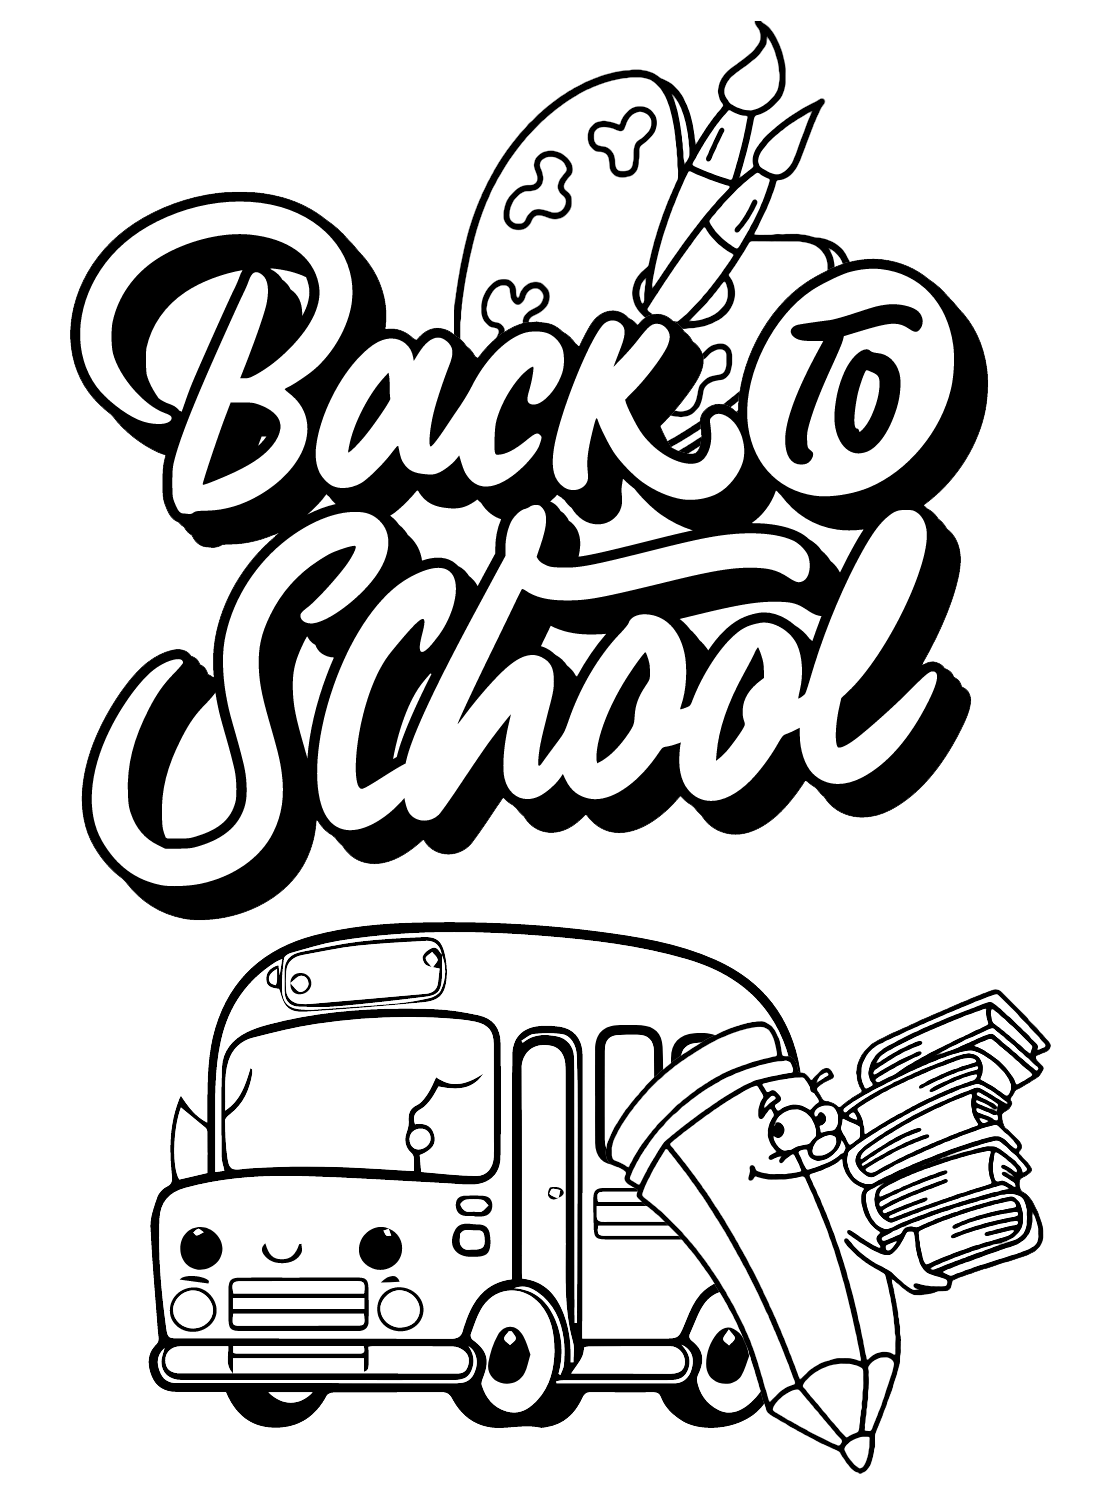 Free Printable Back to School Coloring Page